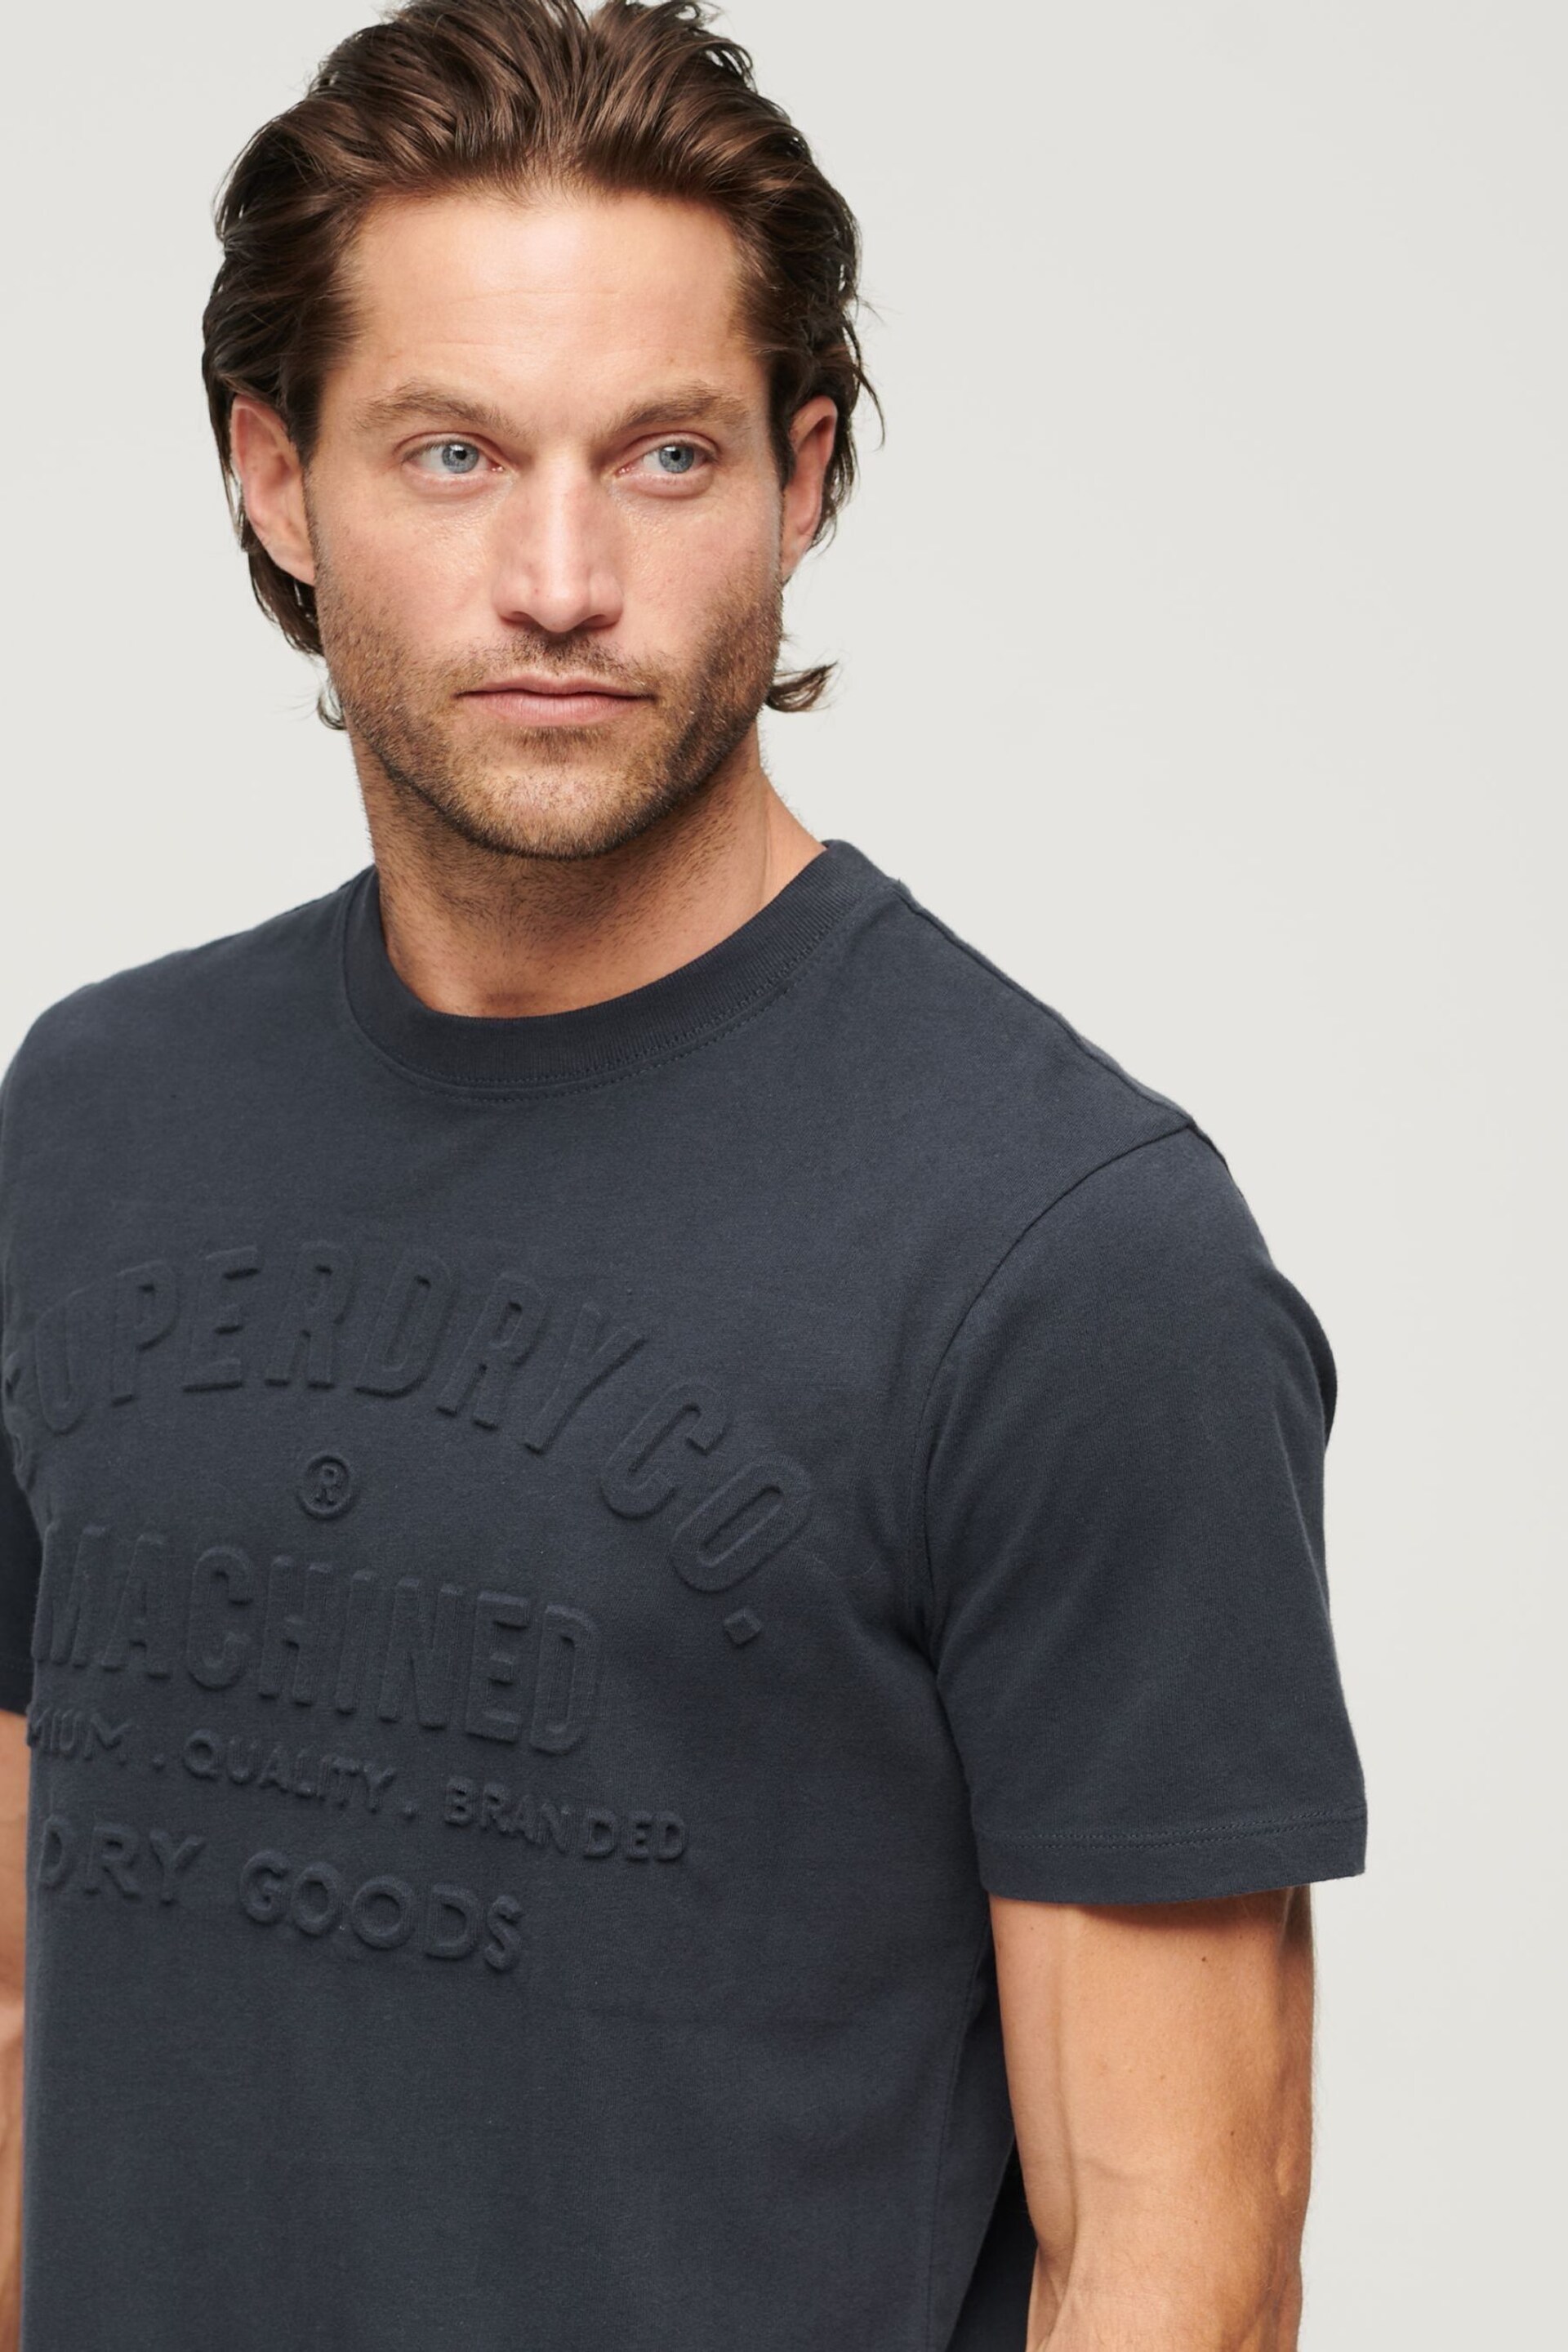 Superdry Blue Embossed Workwear Graphic T-Shirt - Image 3 of 5